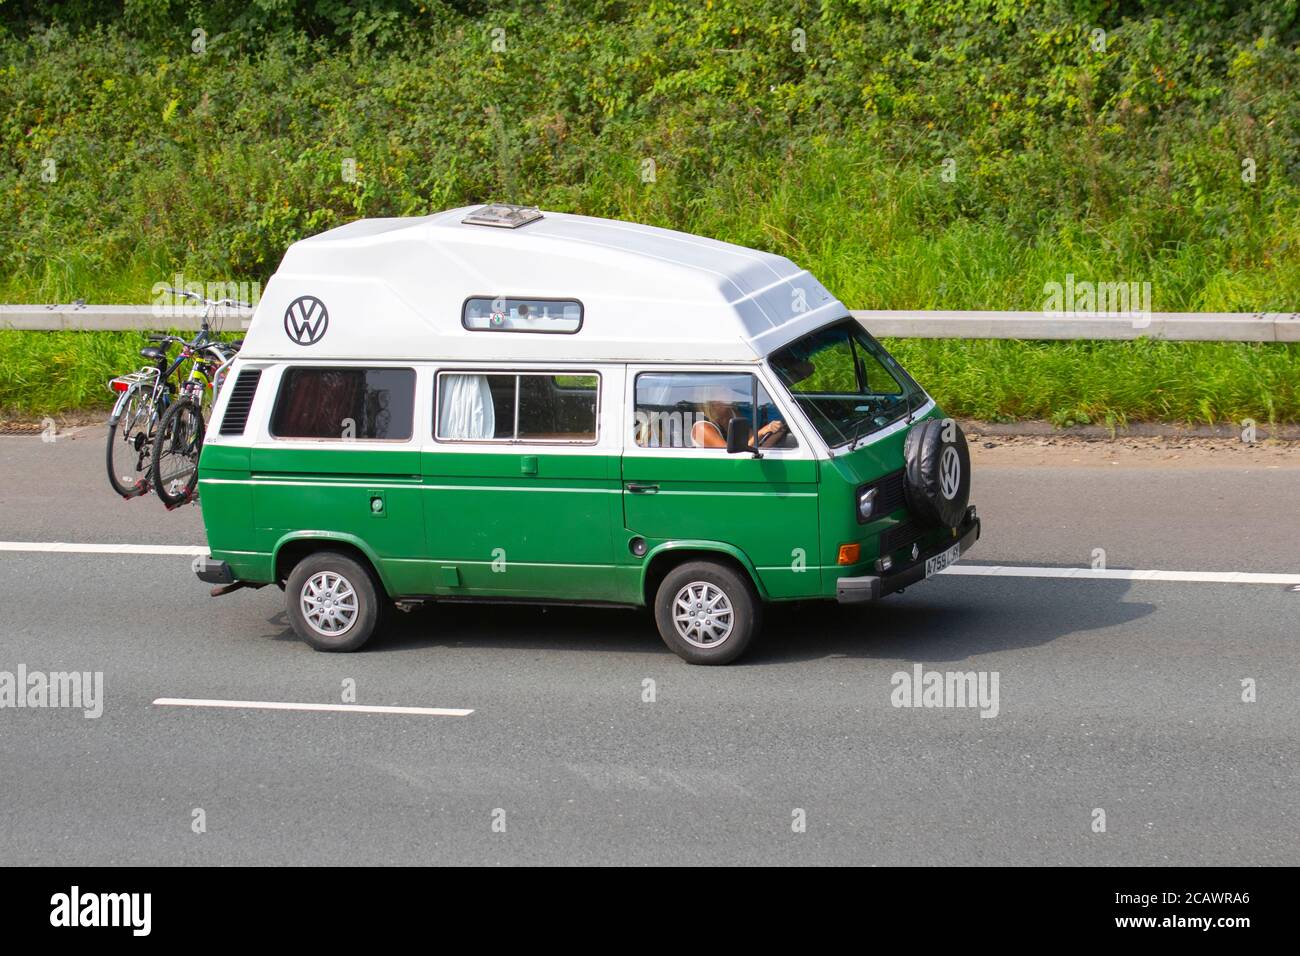 1983 80s green white Volkswagen Caravelle 78Ps; Caravans and Motorhomes, campervans on Britain's roads, RV leisure vehicle, family holidays, caravanette vacations, Touring caravan holiday, van conversions, Vanagon autohome, classic cars, cherished veteran, restored old timer, collectible motors, vintage heritage, old preserved, collectable, resto VW vans. Stock Photo